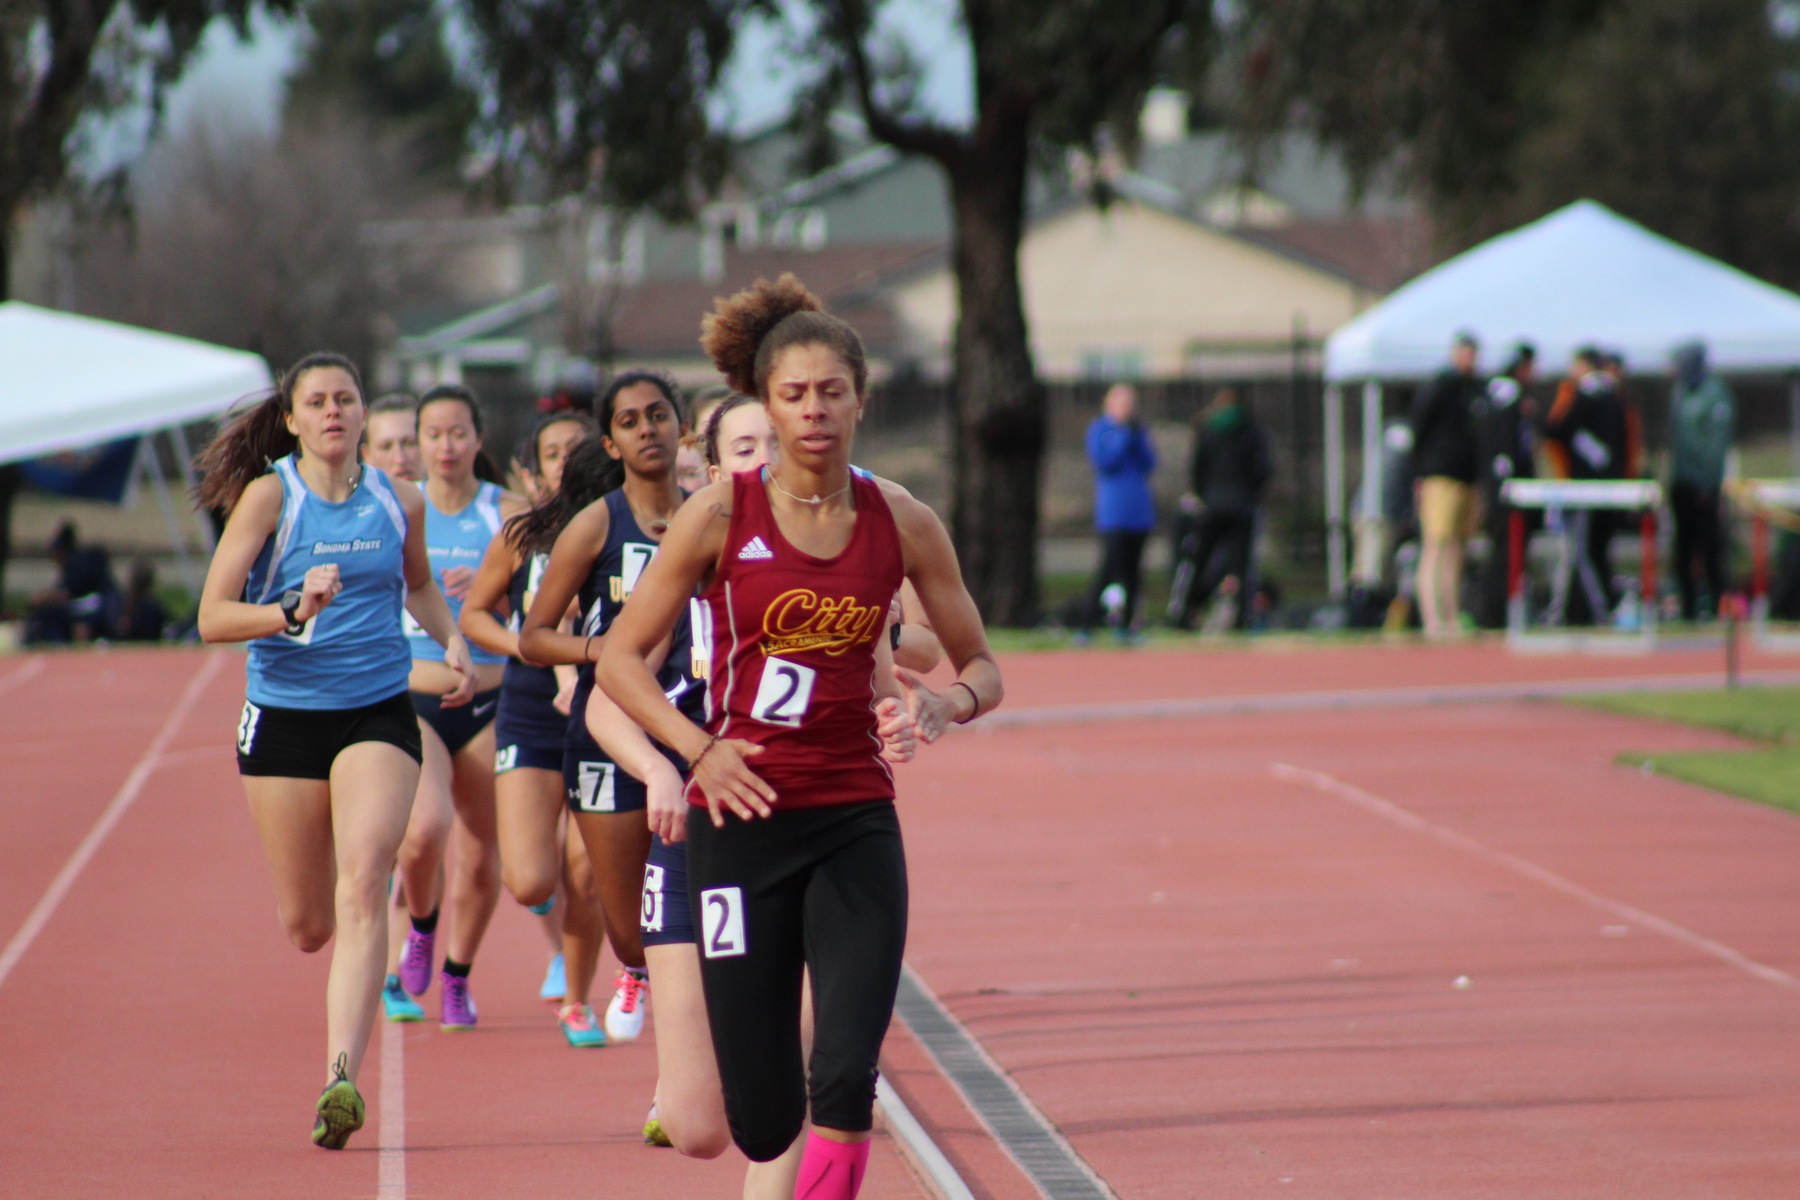 Women's Track & Field opens up the season with a 4th place finish at the Yuba 49er Invite